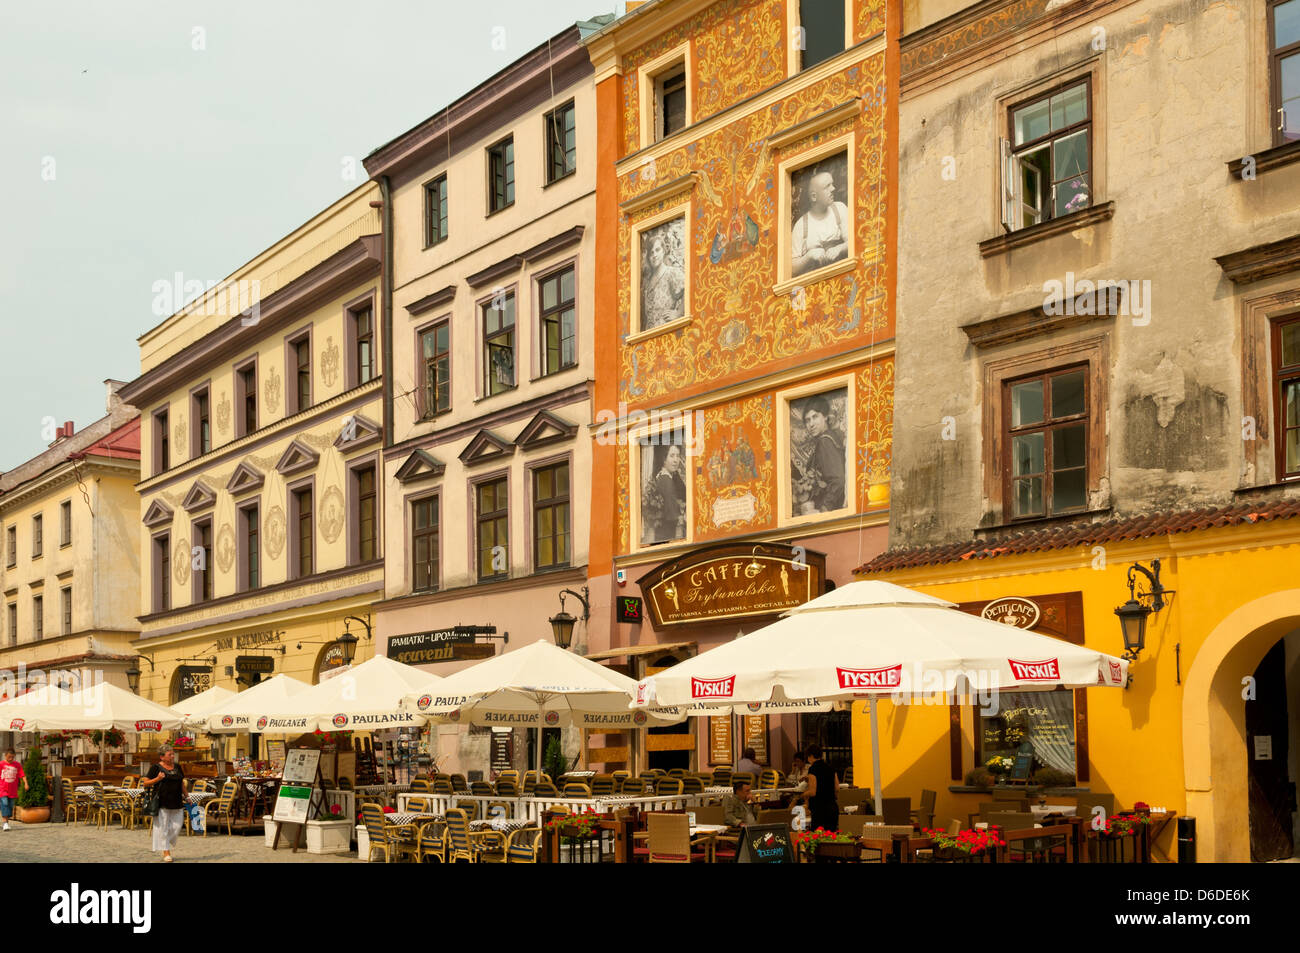 Market Square, Old Town, Lublin, Poland Stock Photo